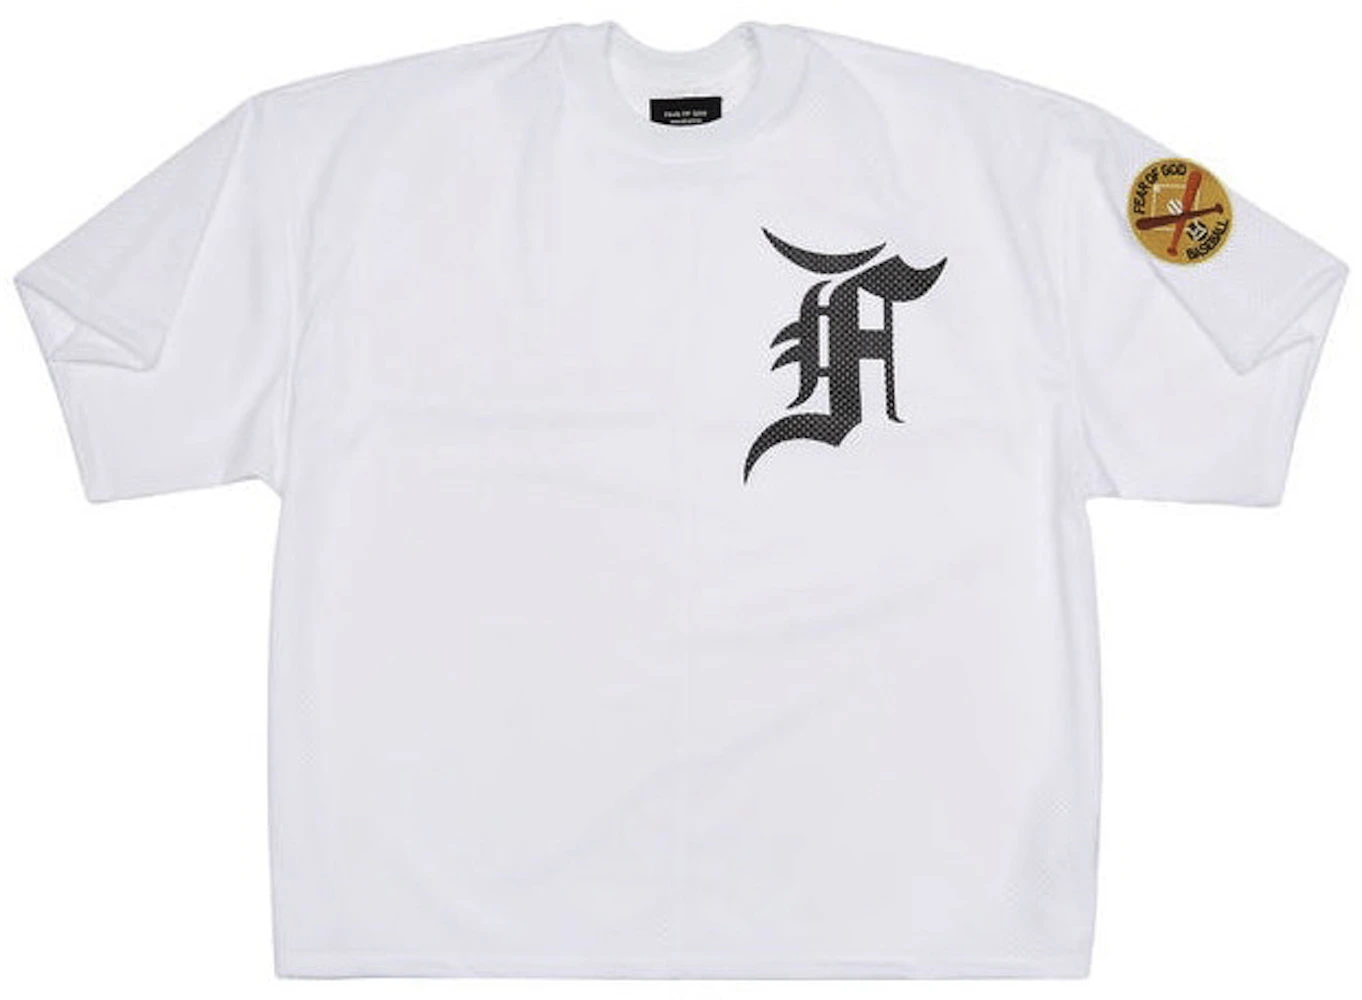 FEAR OF GOD SSENSE Mesh Batting Practice Jersey White Men's - Fifth  Collection - US